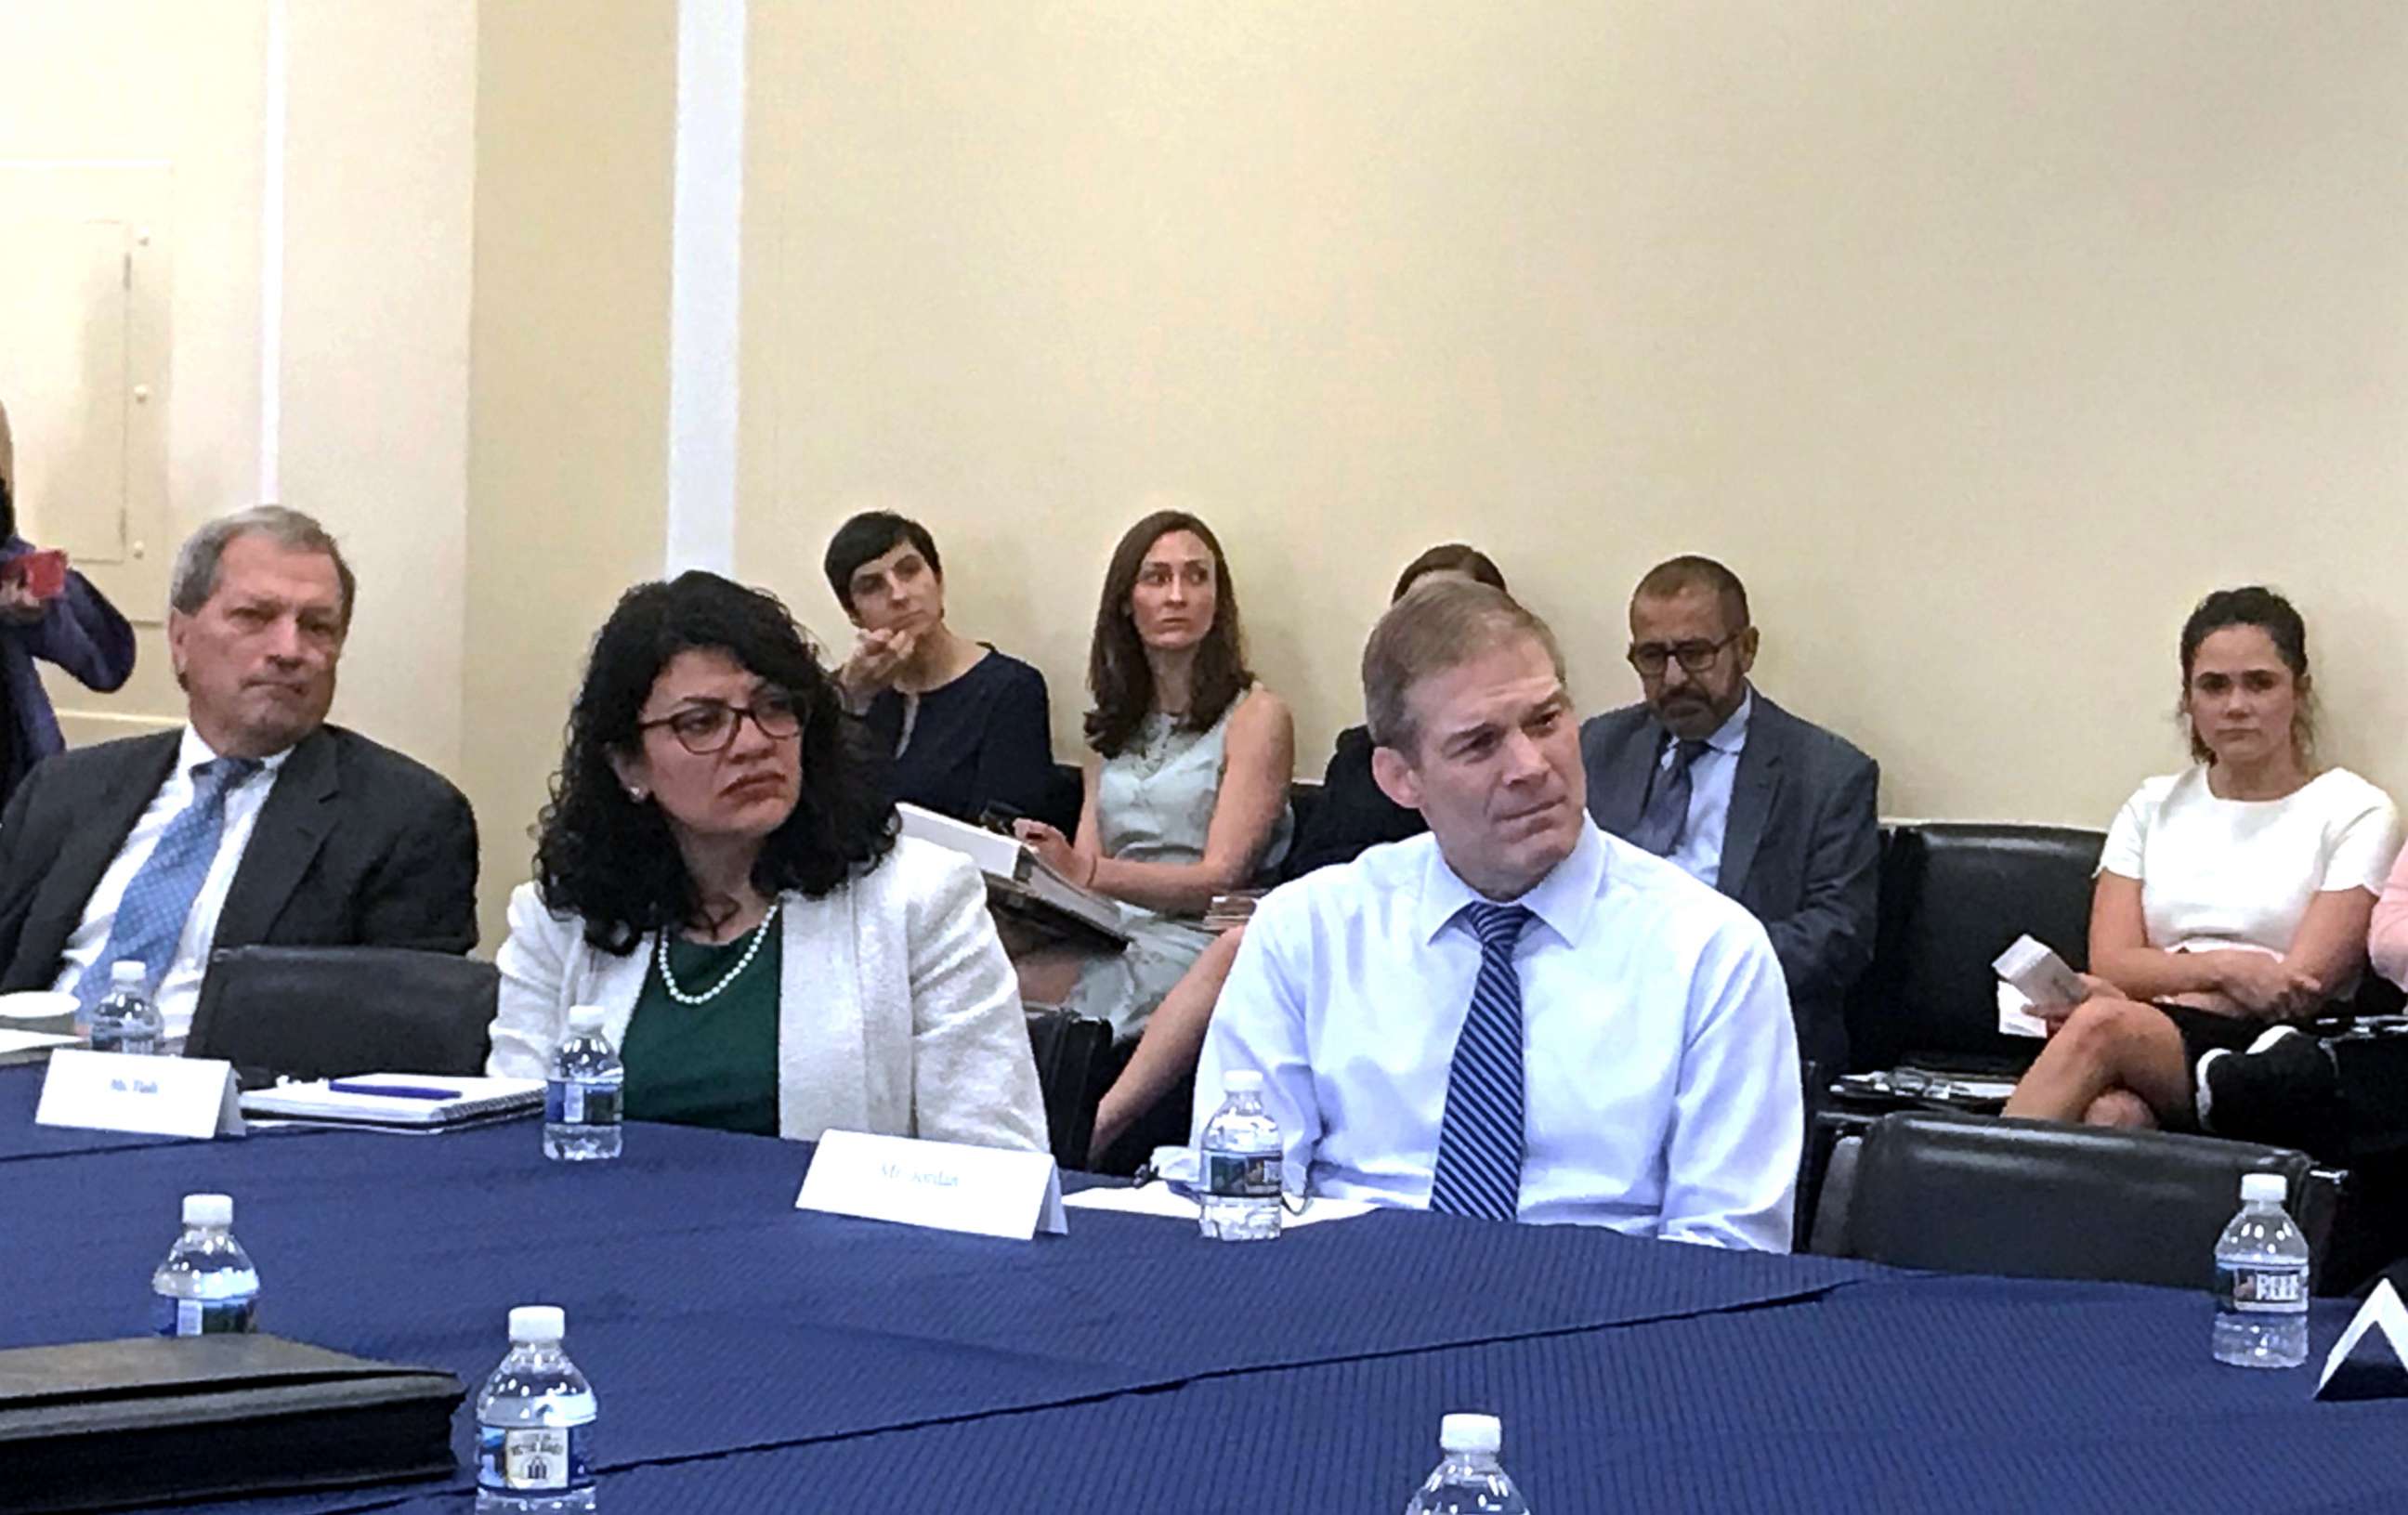 PHOTO: Rep. Rashida Tlaib and Rep. Jim Jordan at a round table discussion before the House Oversight Committee hearing on the Trump administration's response to the opioid crisis, May 9, 2019.